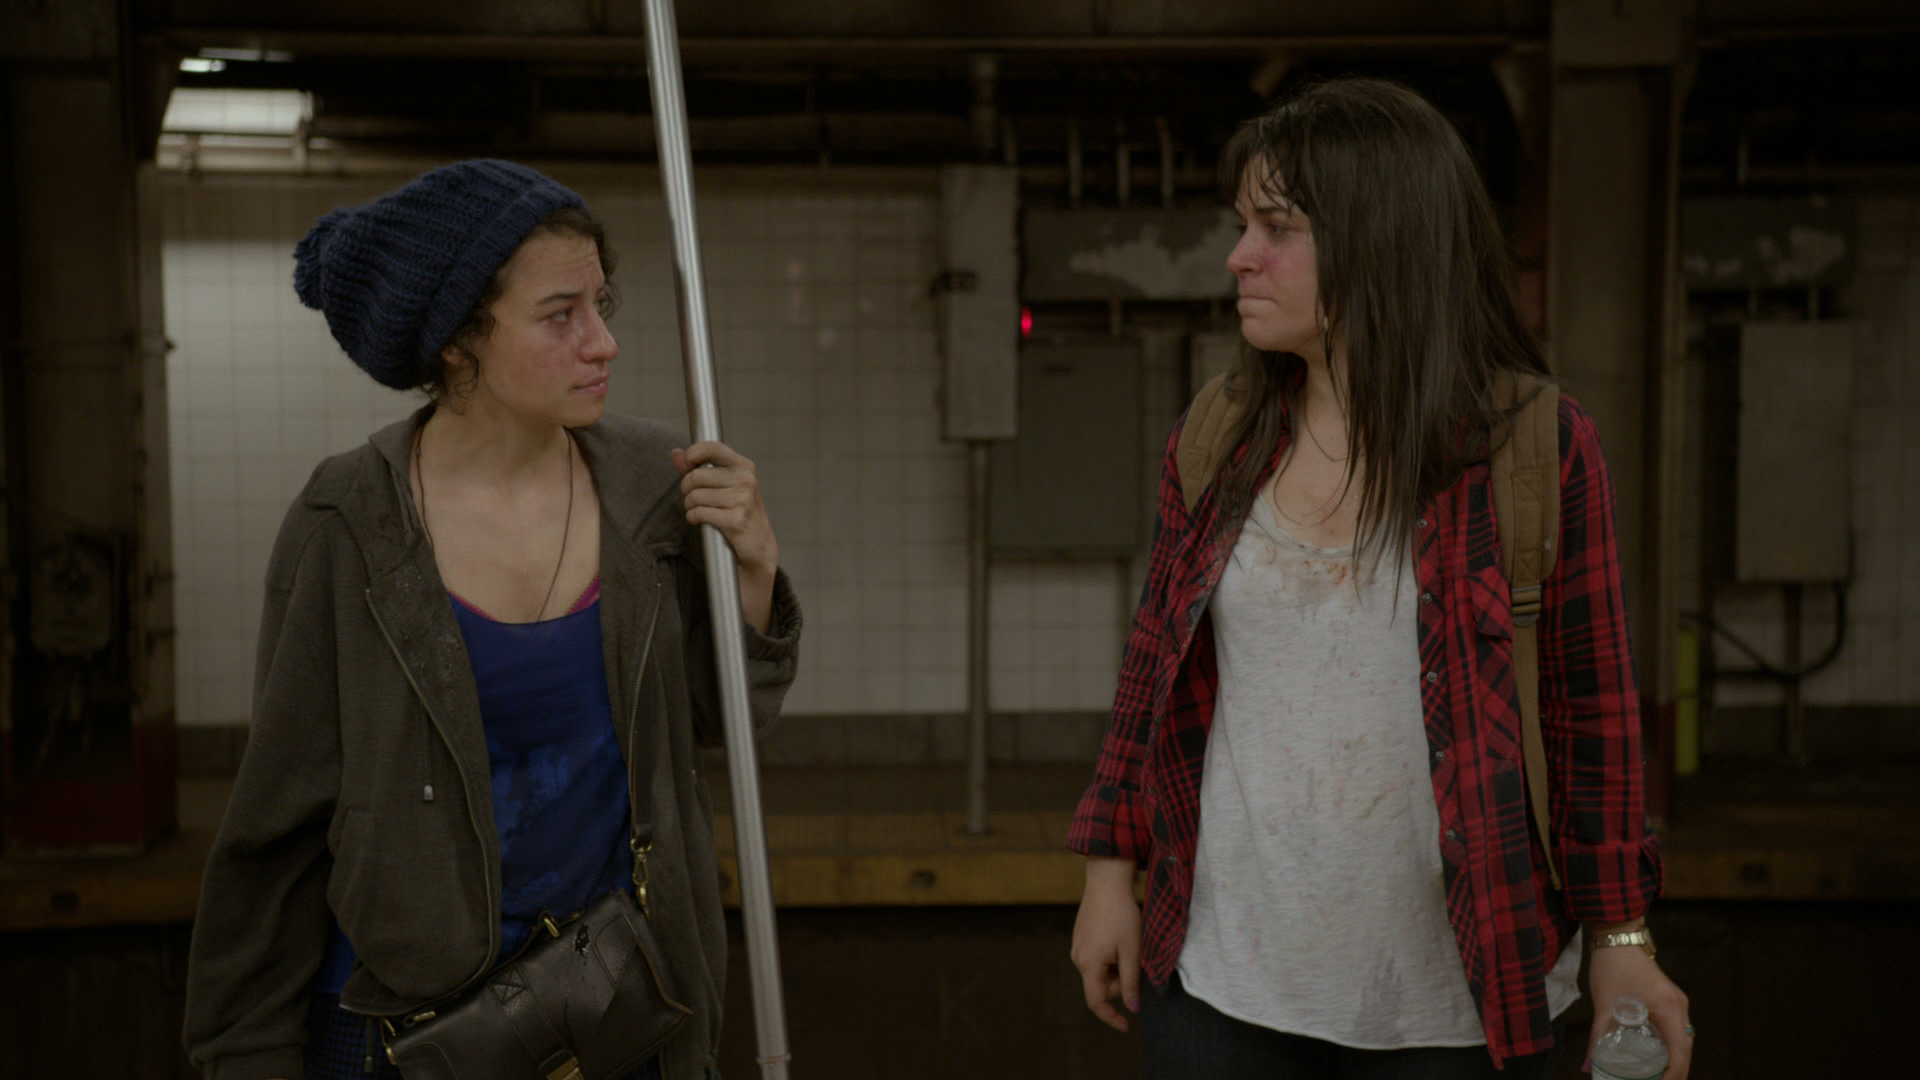 Watch Broad City Season 1 Episode 4 Broad City The Lockout Full Show On Paramount Plus 9952